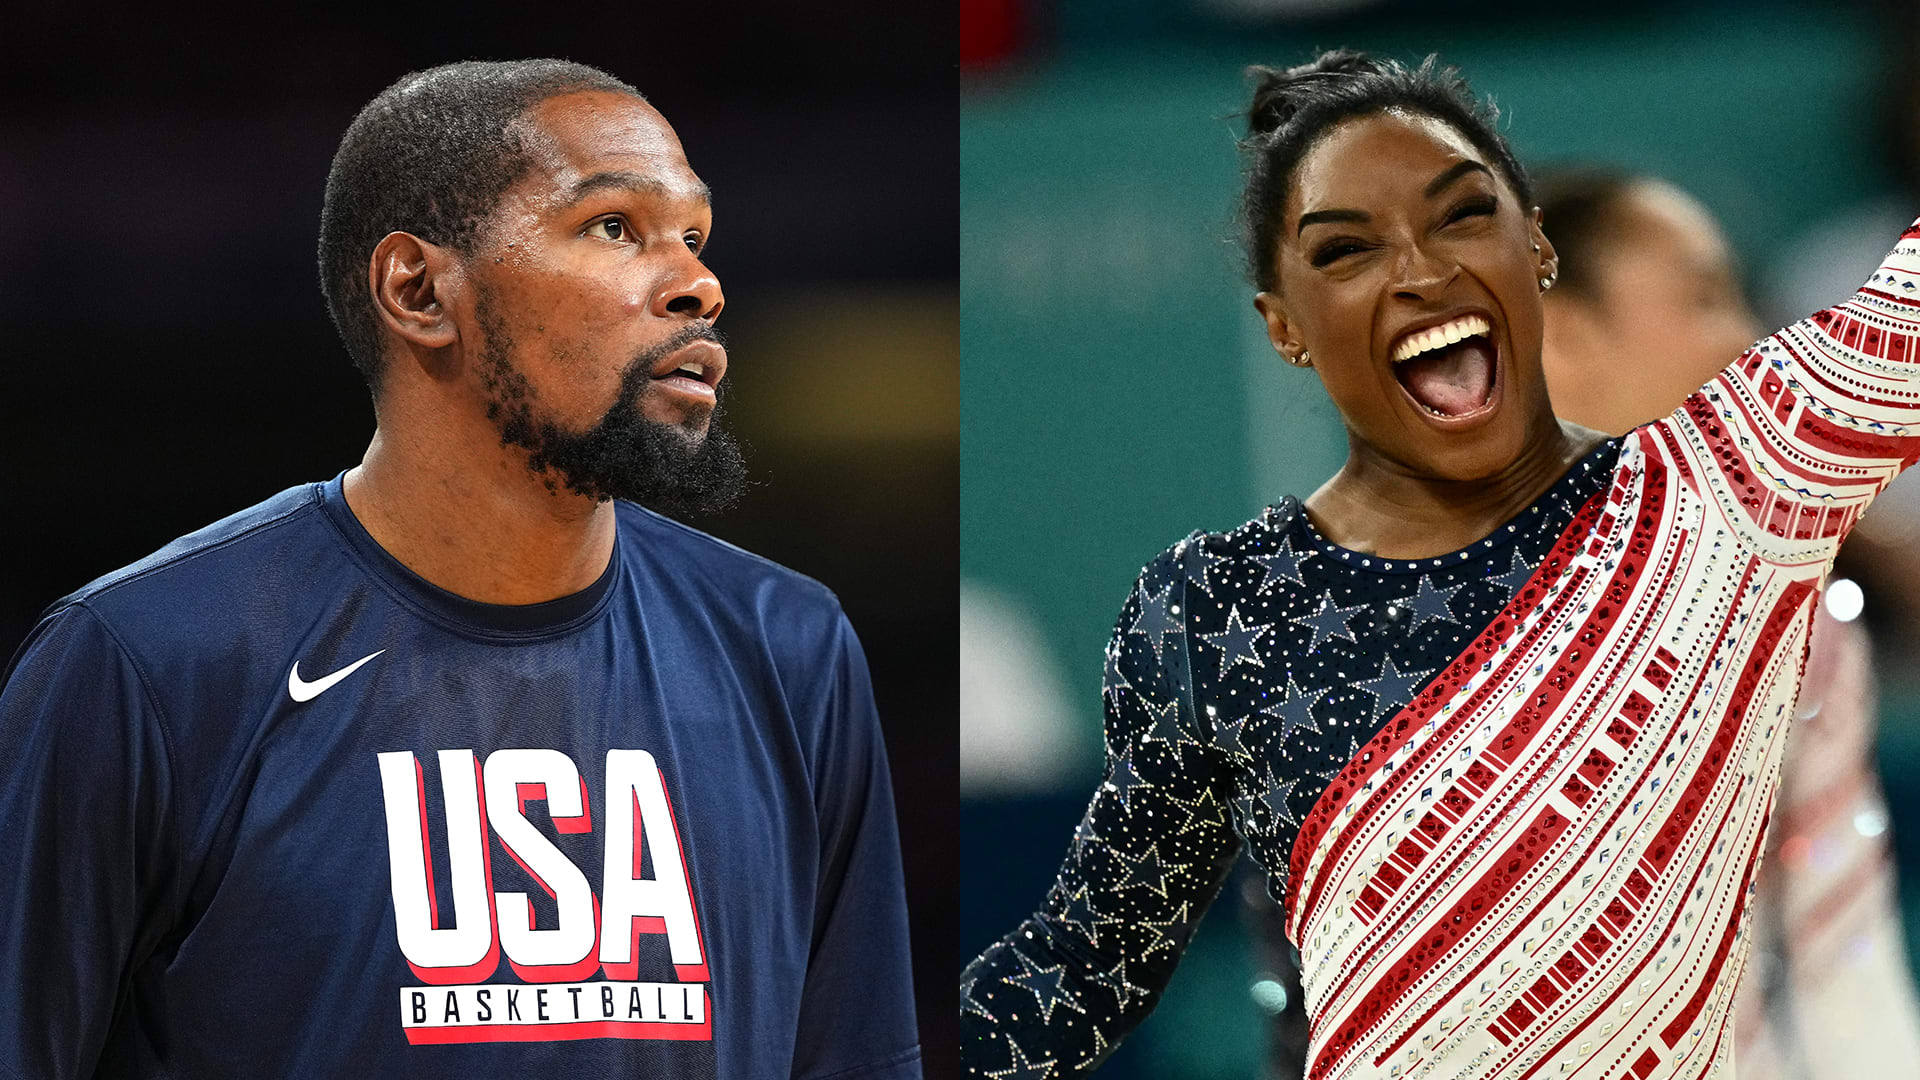 A spliced image showing NBA star Kevin Durant and gymnast Simone Biles at the 2024 Paris Olympics.